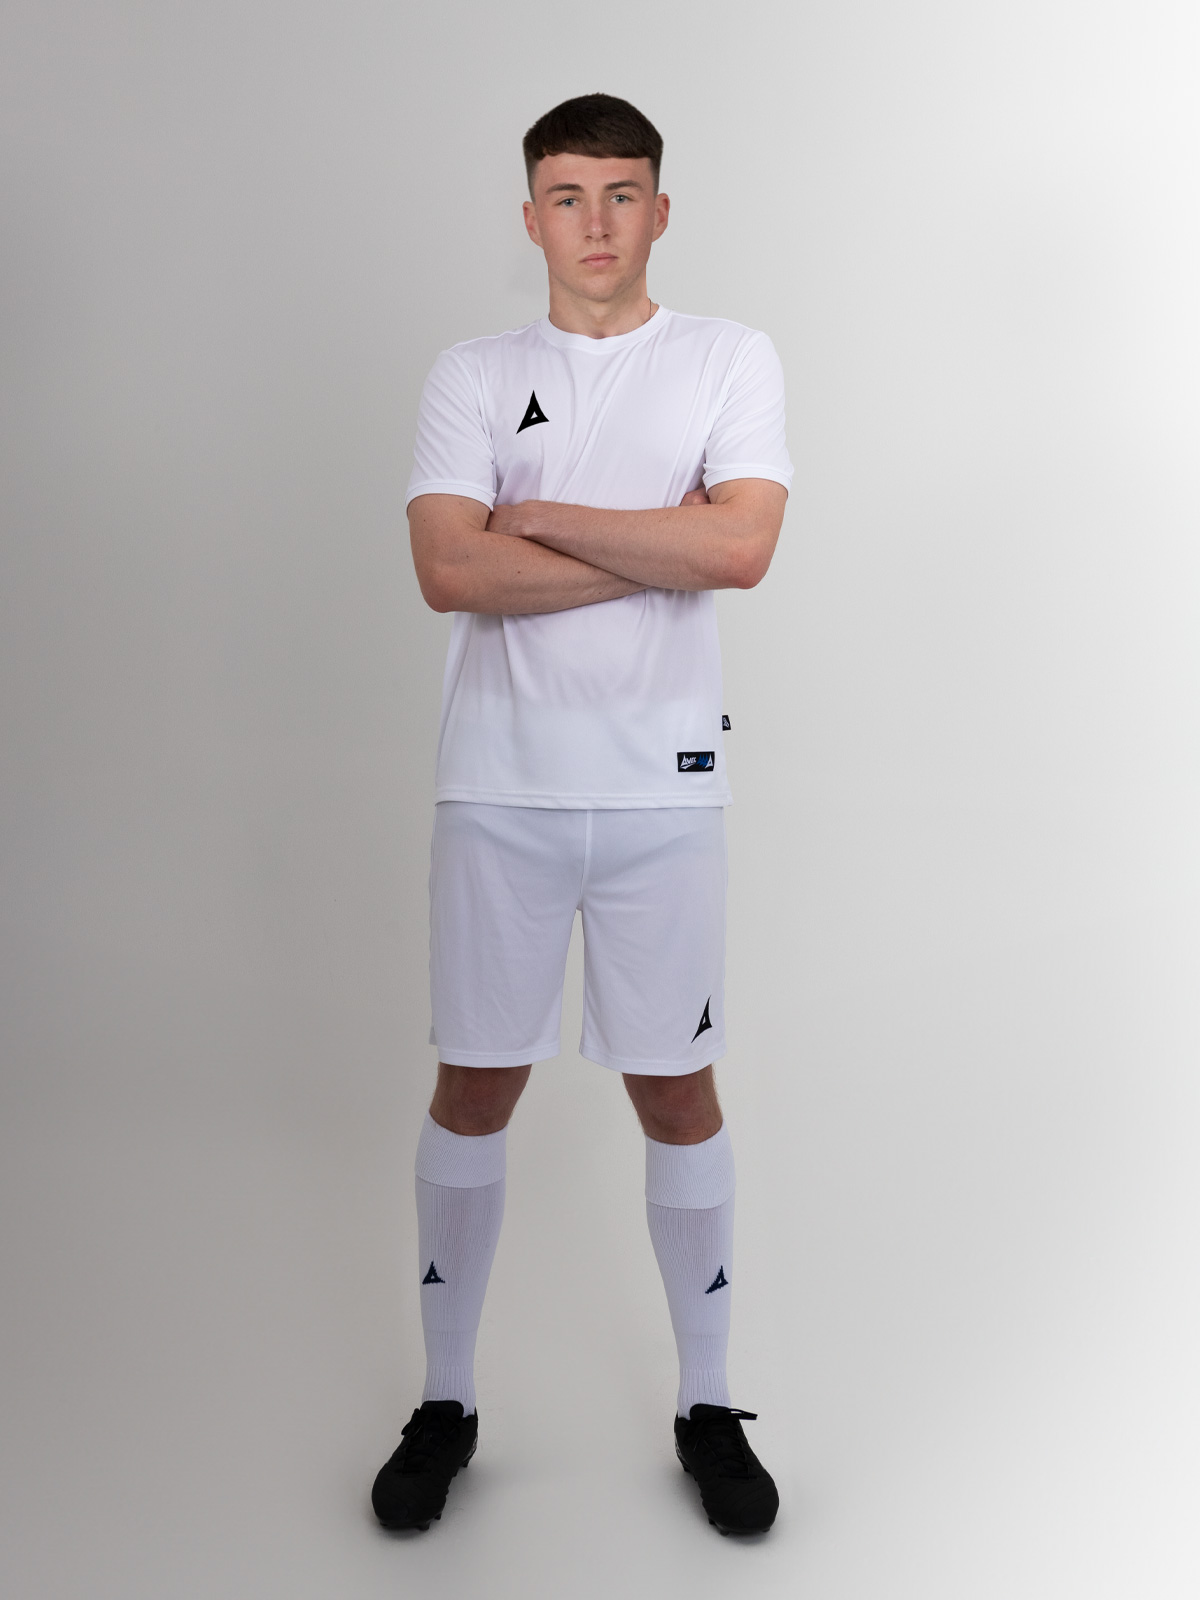 the person in the shoot is wearing a full white kit, but the shirt can also be worn with black shorts